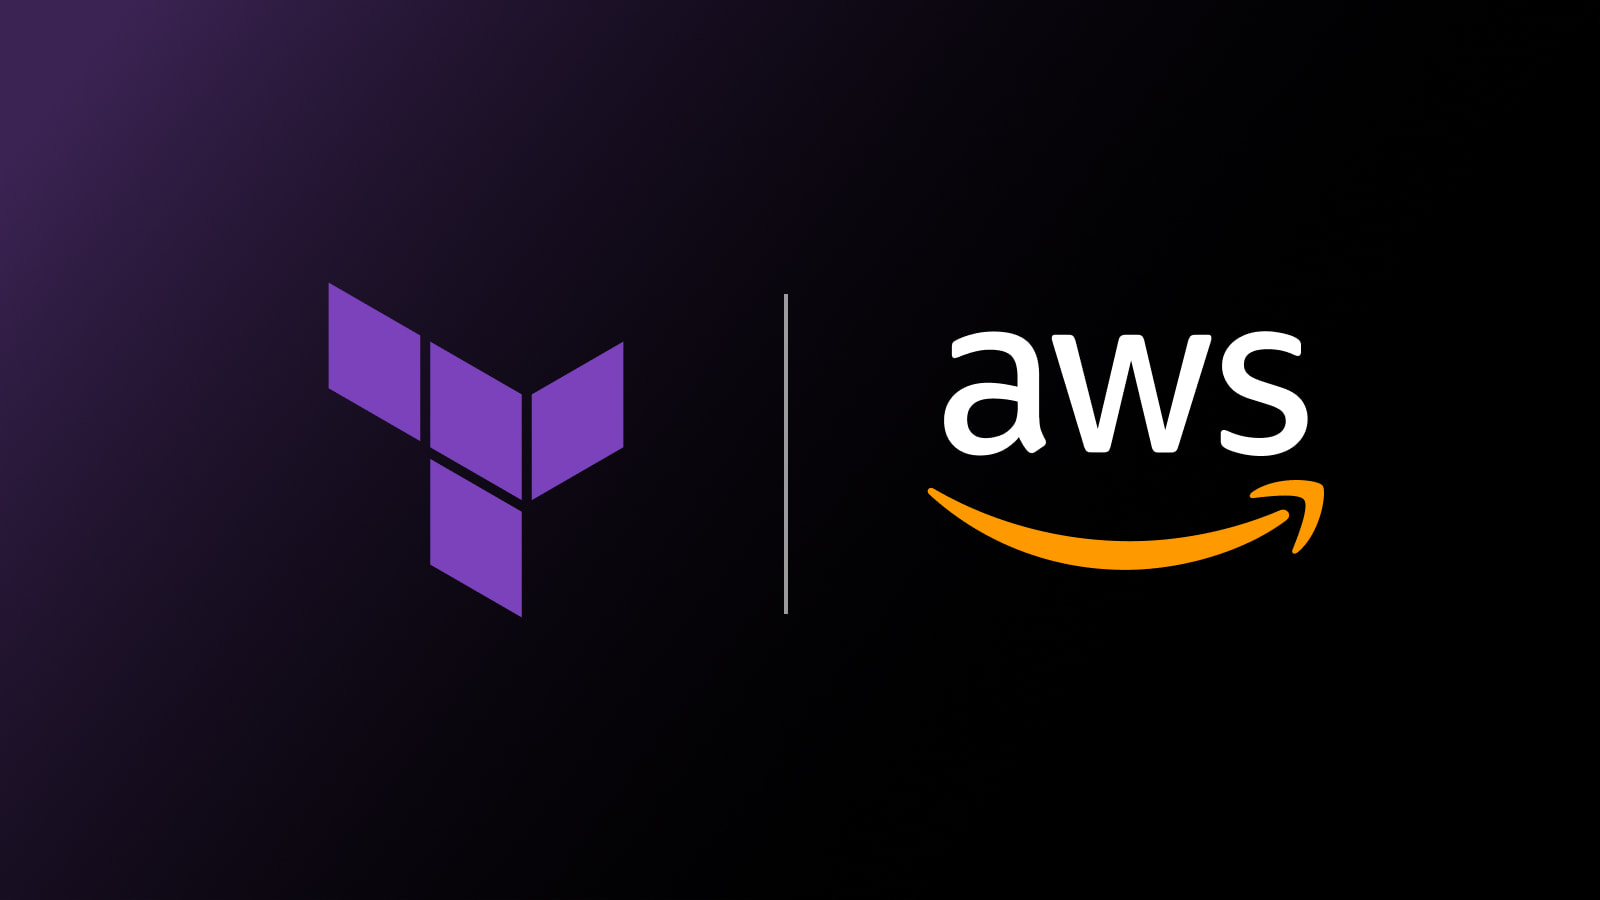 Default Tags in the Terraform AWS Provider